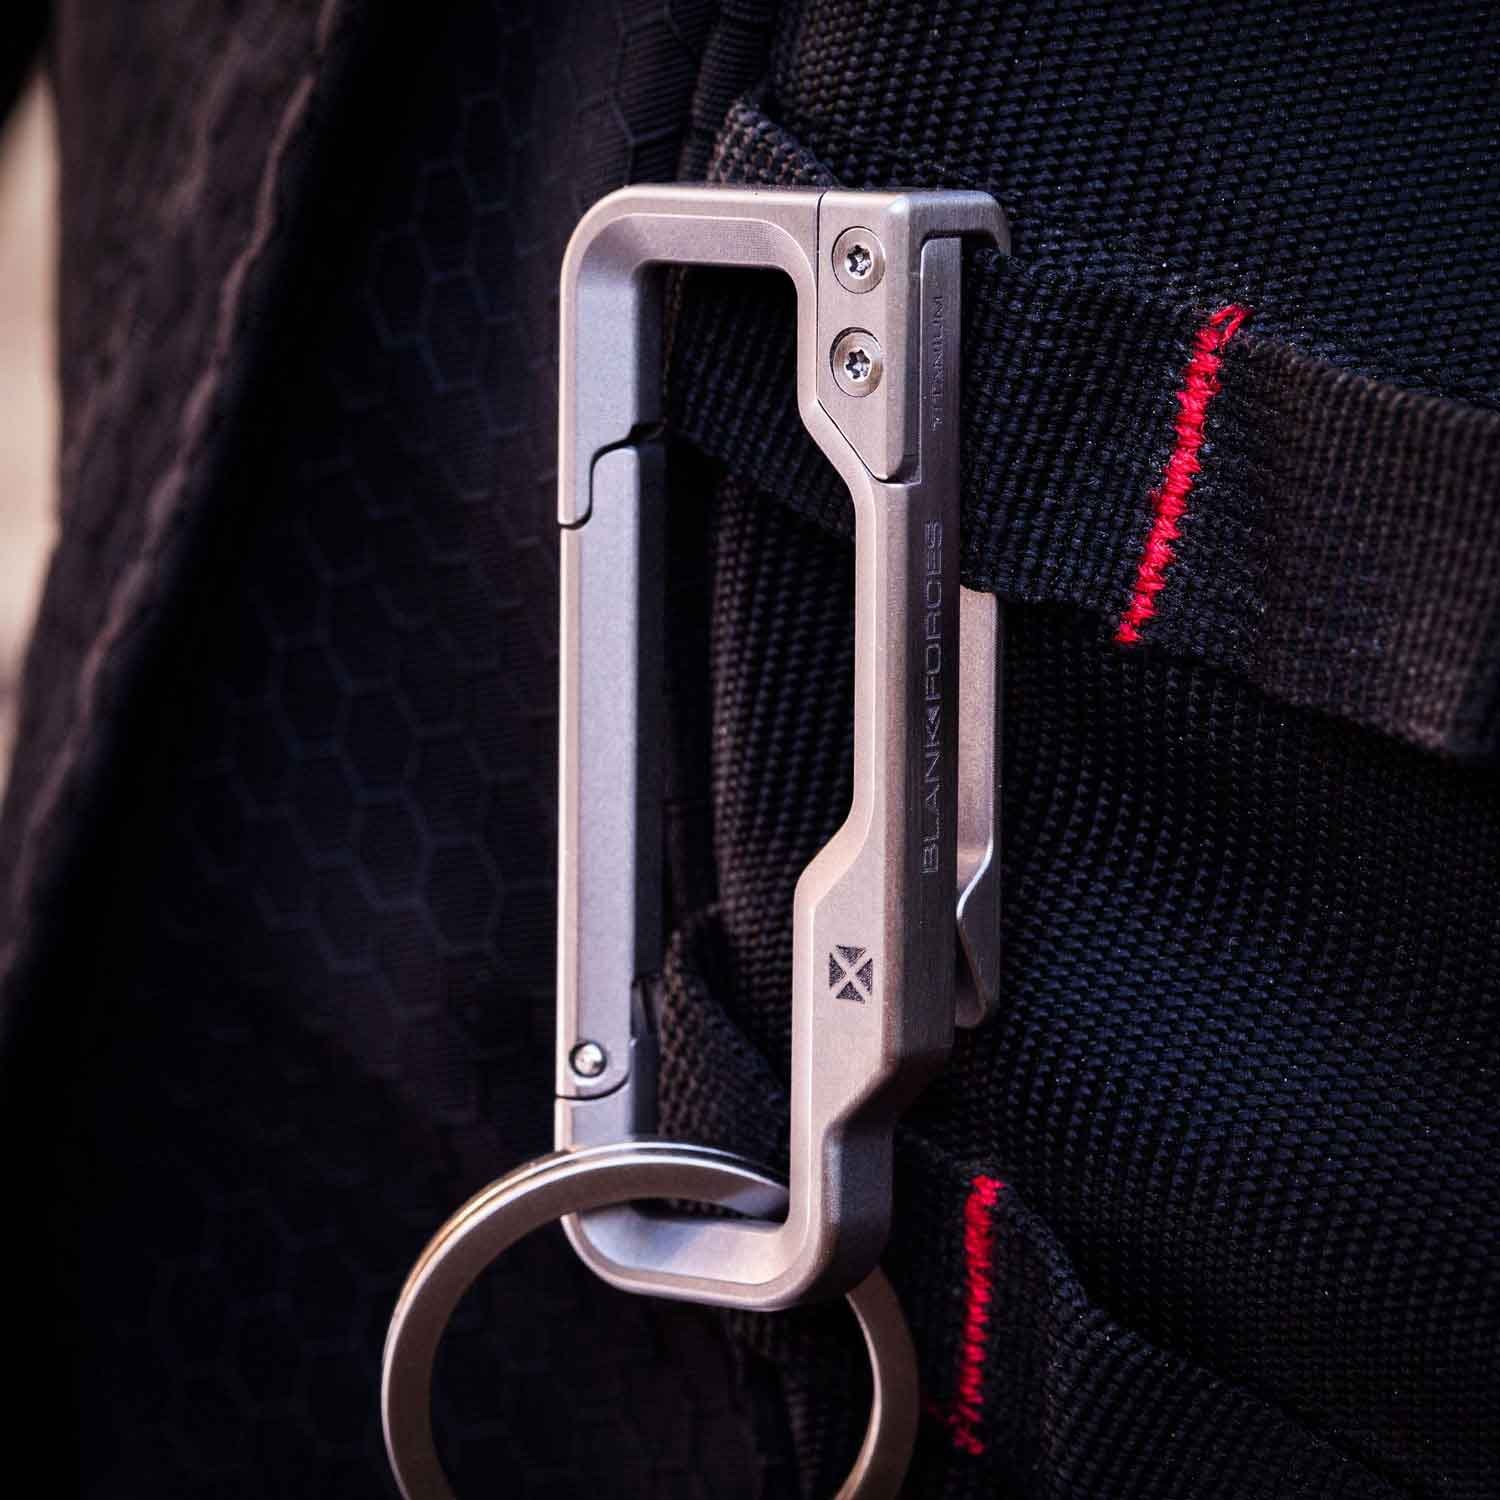 EDC Titanium HyperLink carabiner clipped to backpack.